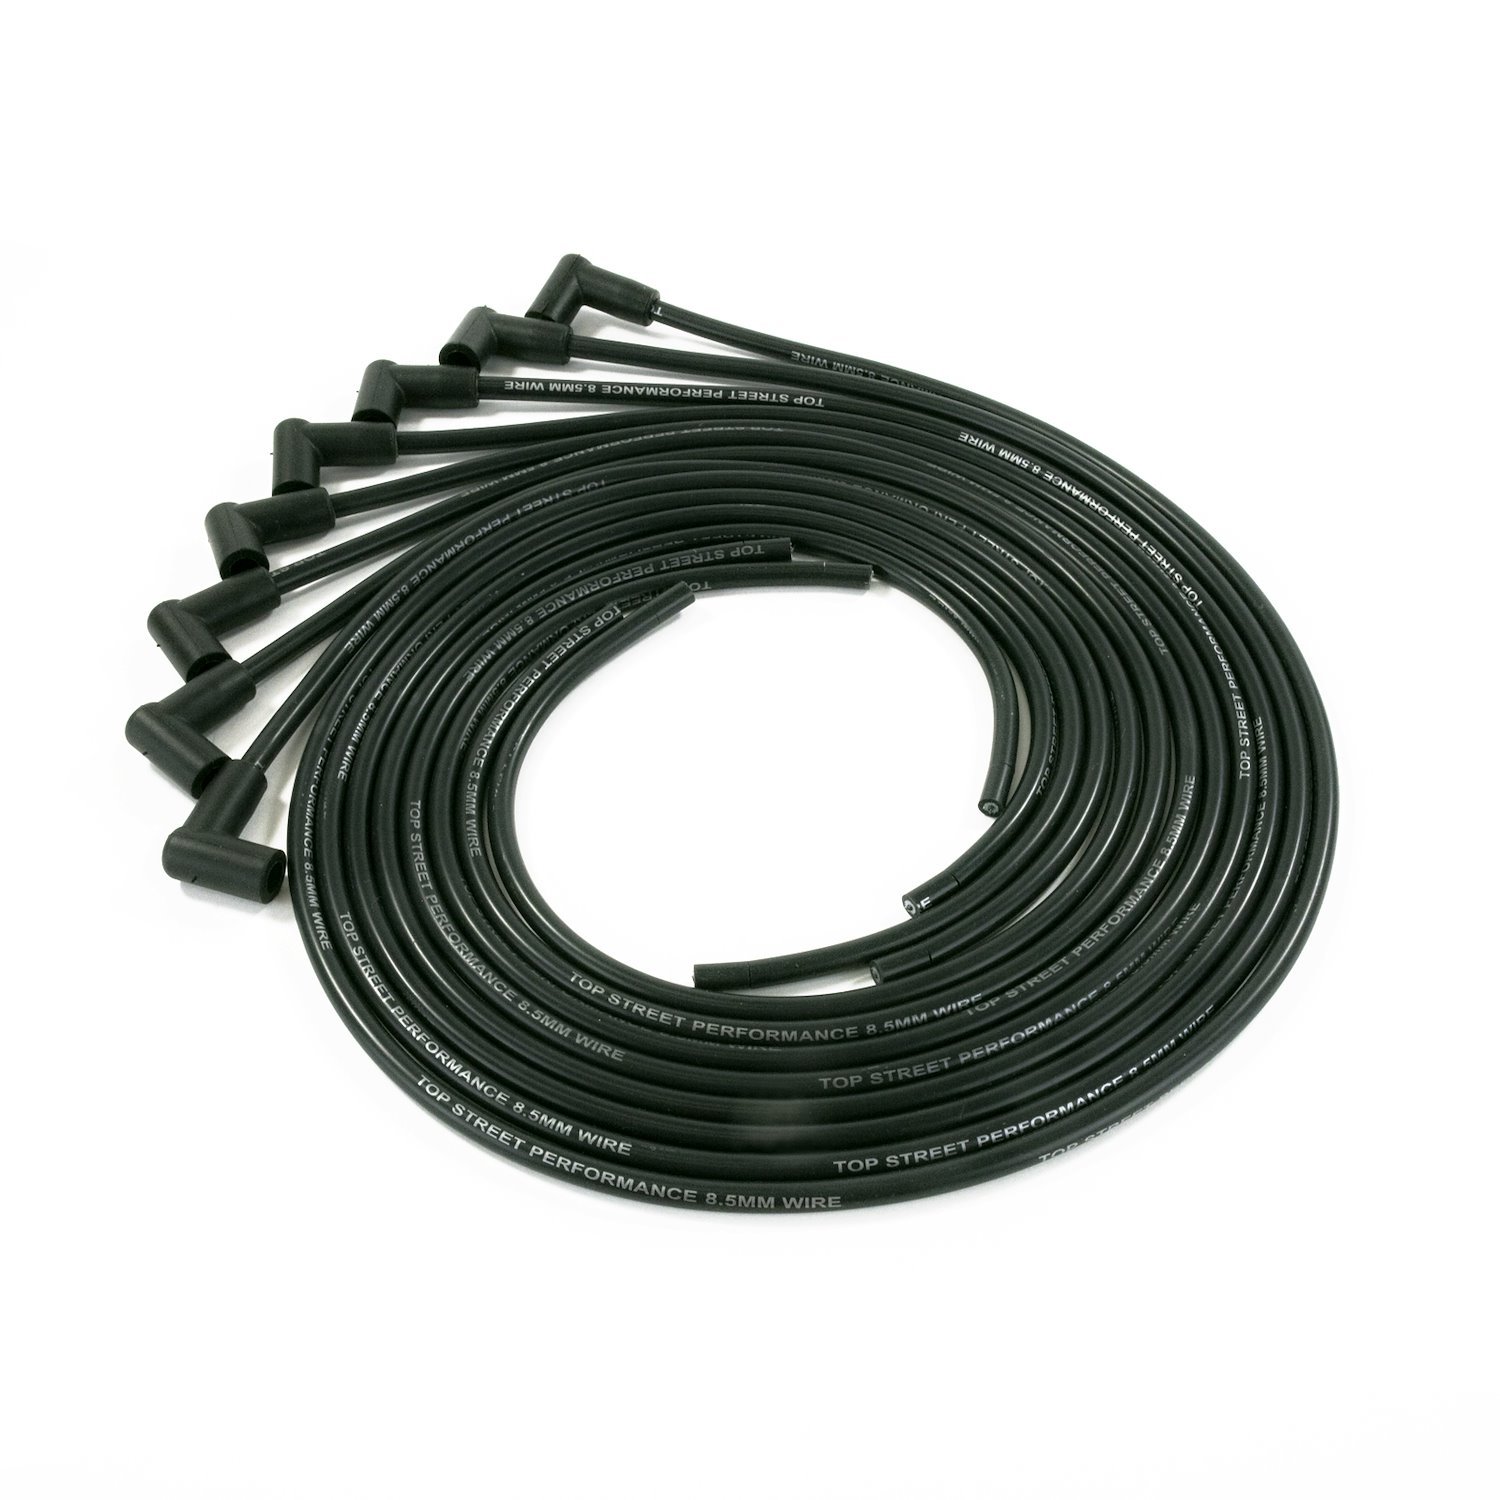 85090 Universal Ignition Wires, 8.5mm Black, 90-Degrees Plug Boots